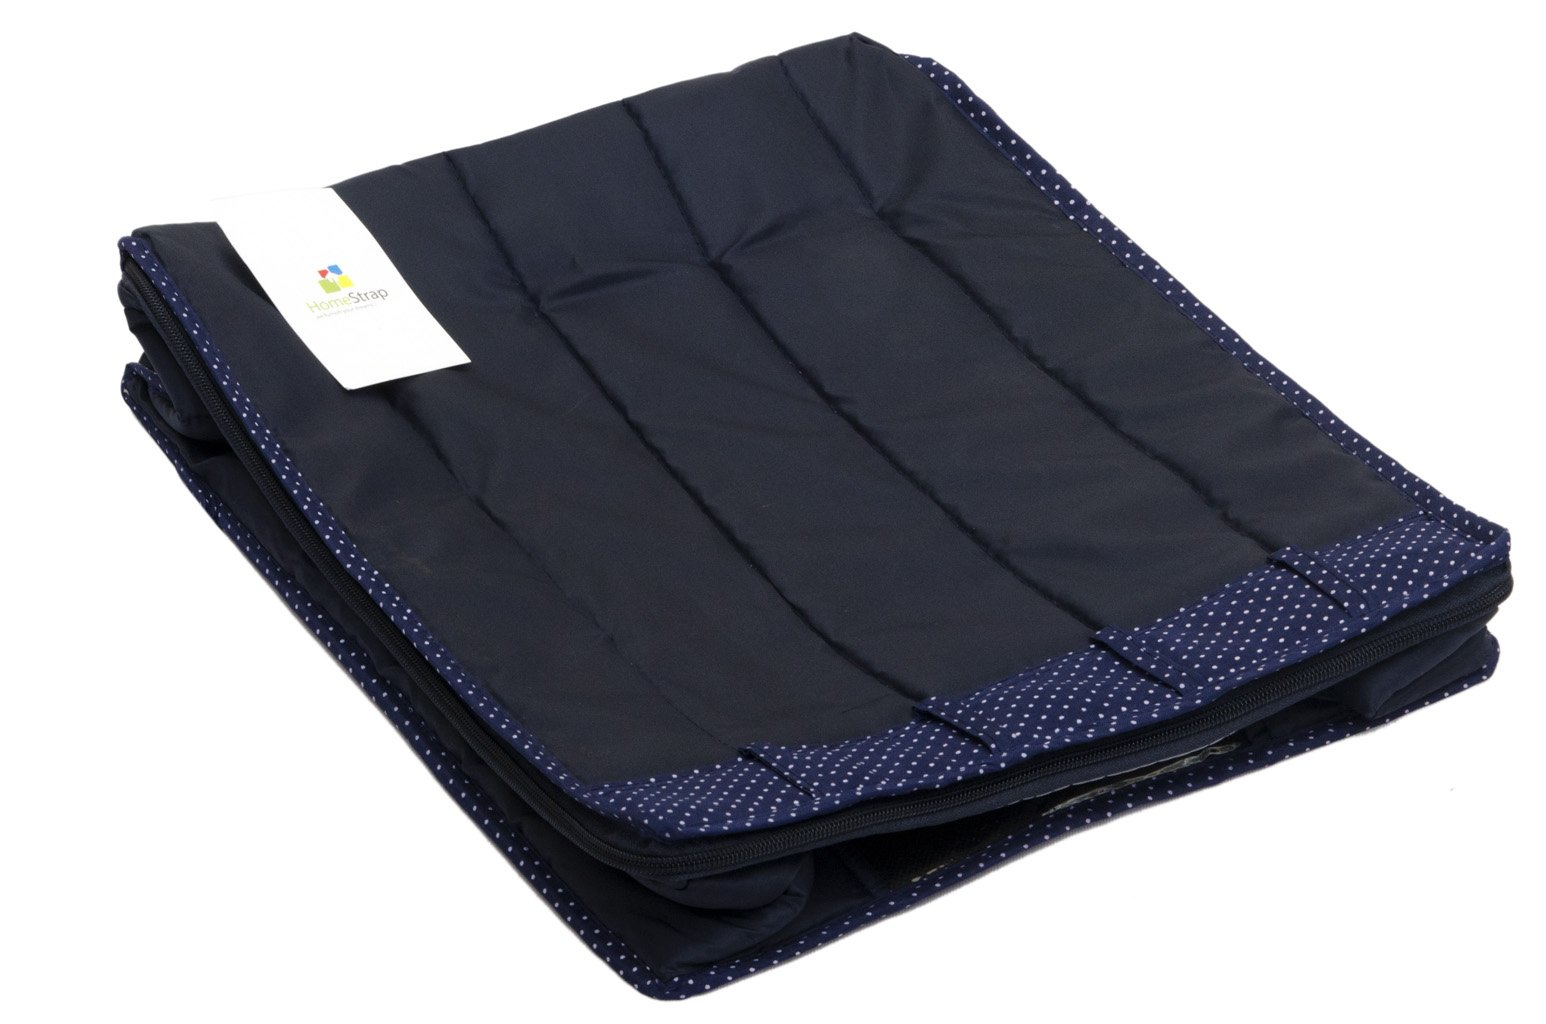 Parachute Quilted Trouser Cover | Wardrobe Clothes Organizer